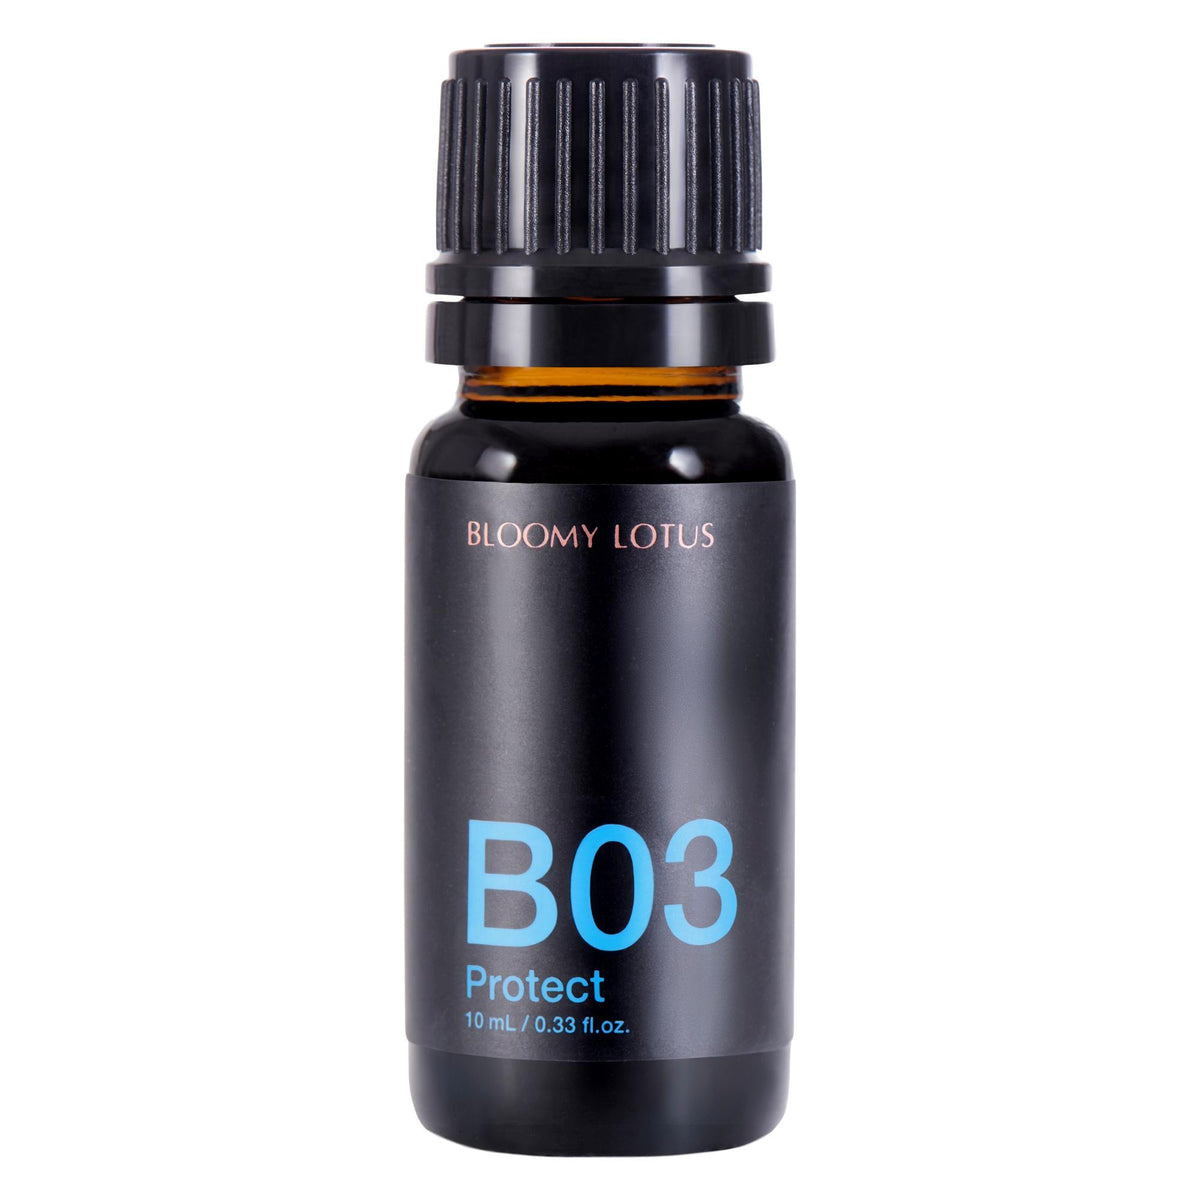 B03 Protect Essential Oil, 10 ml